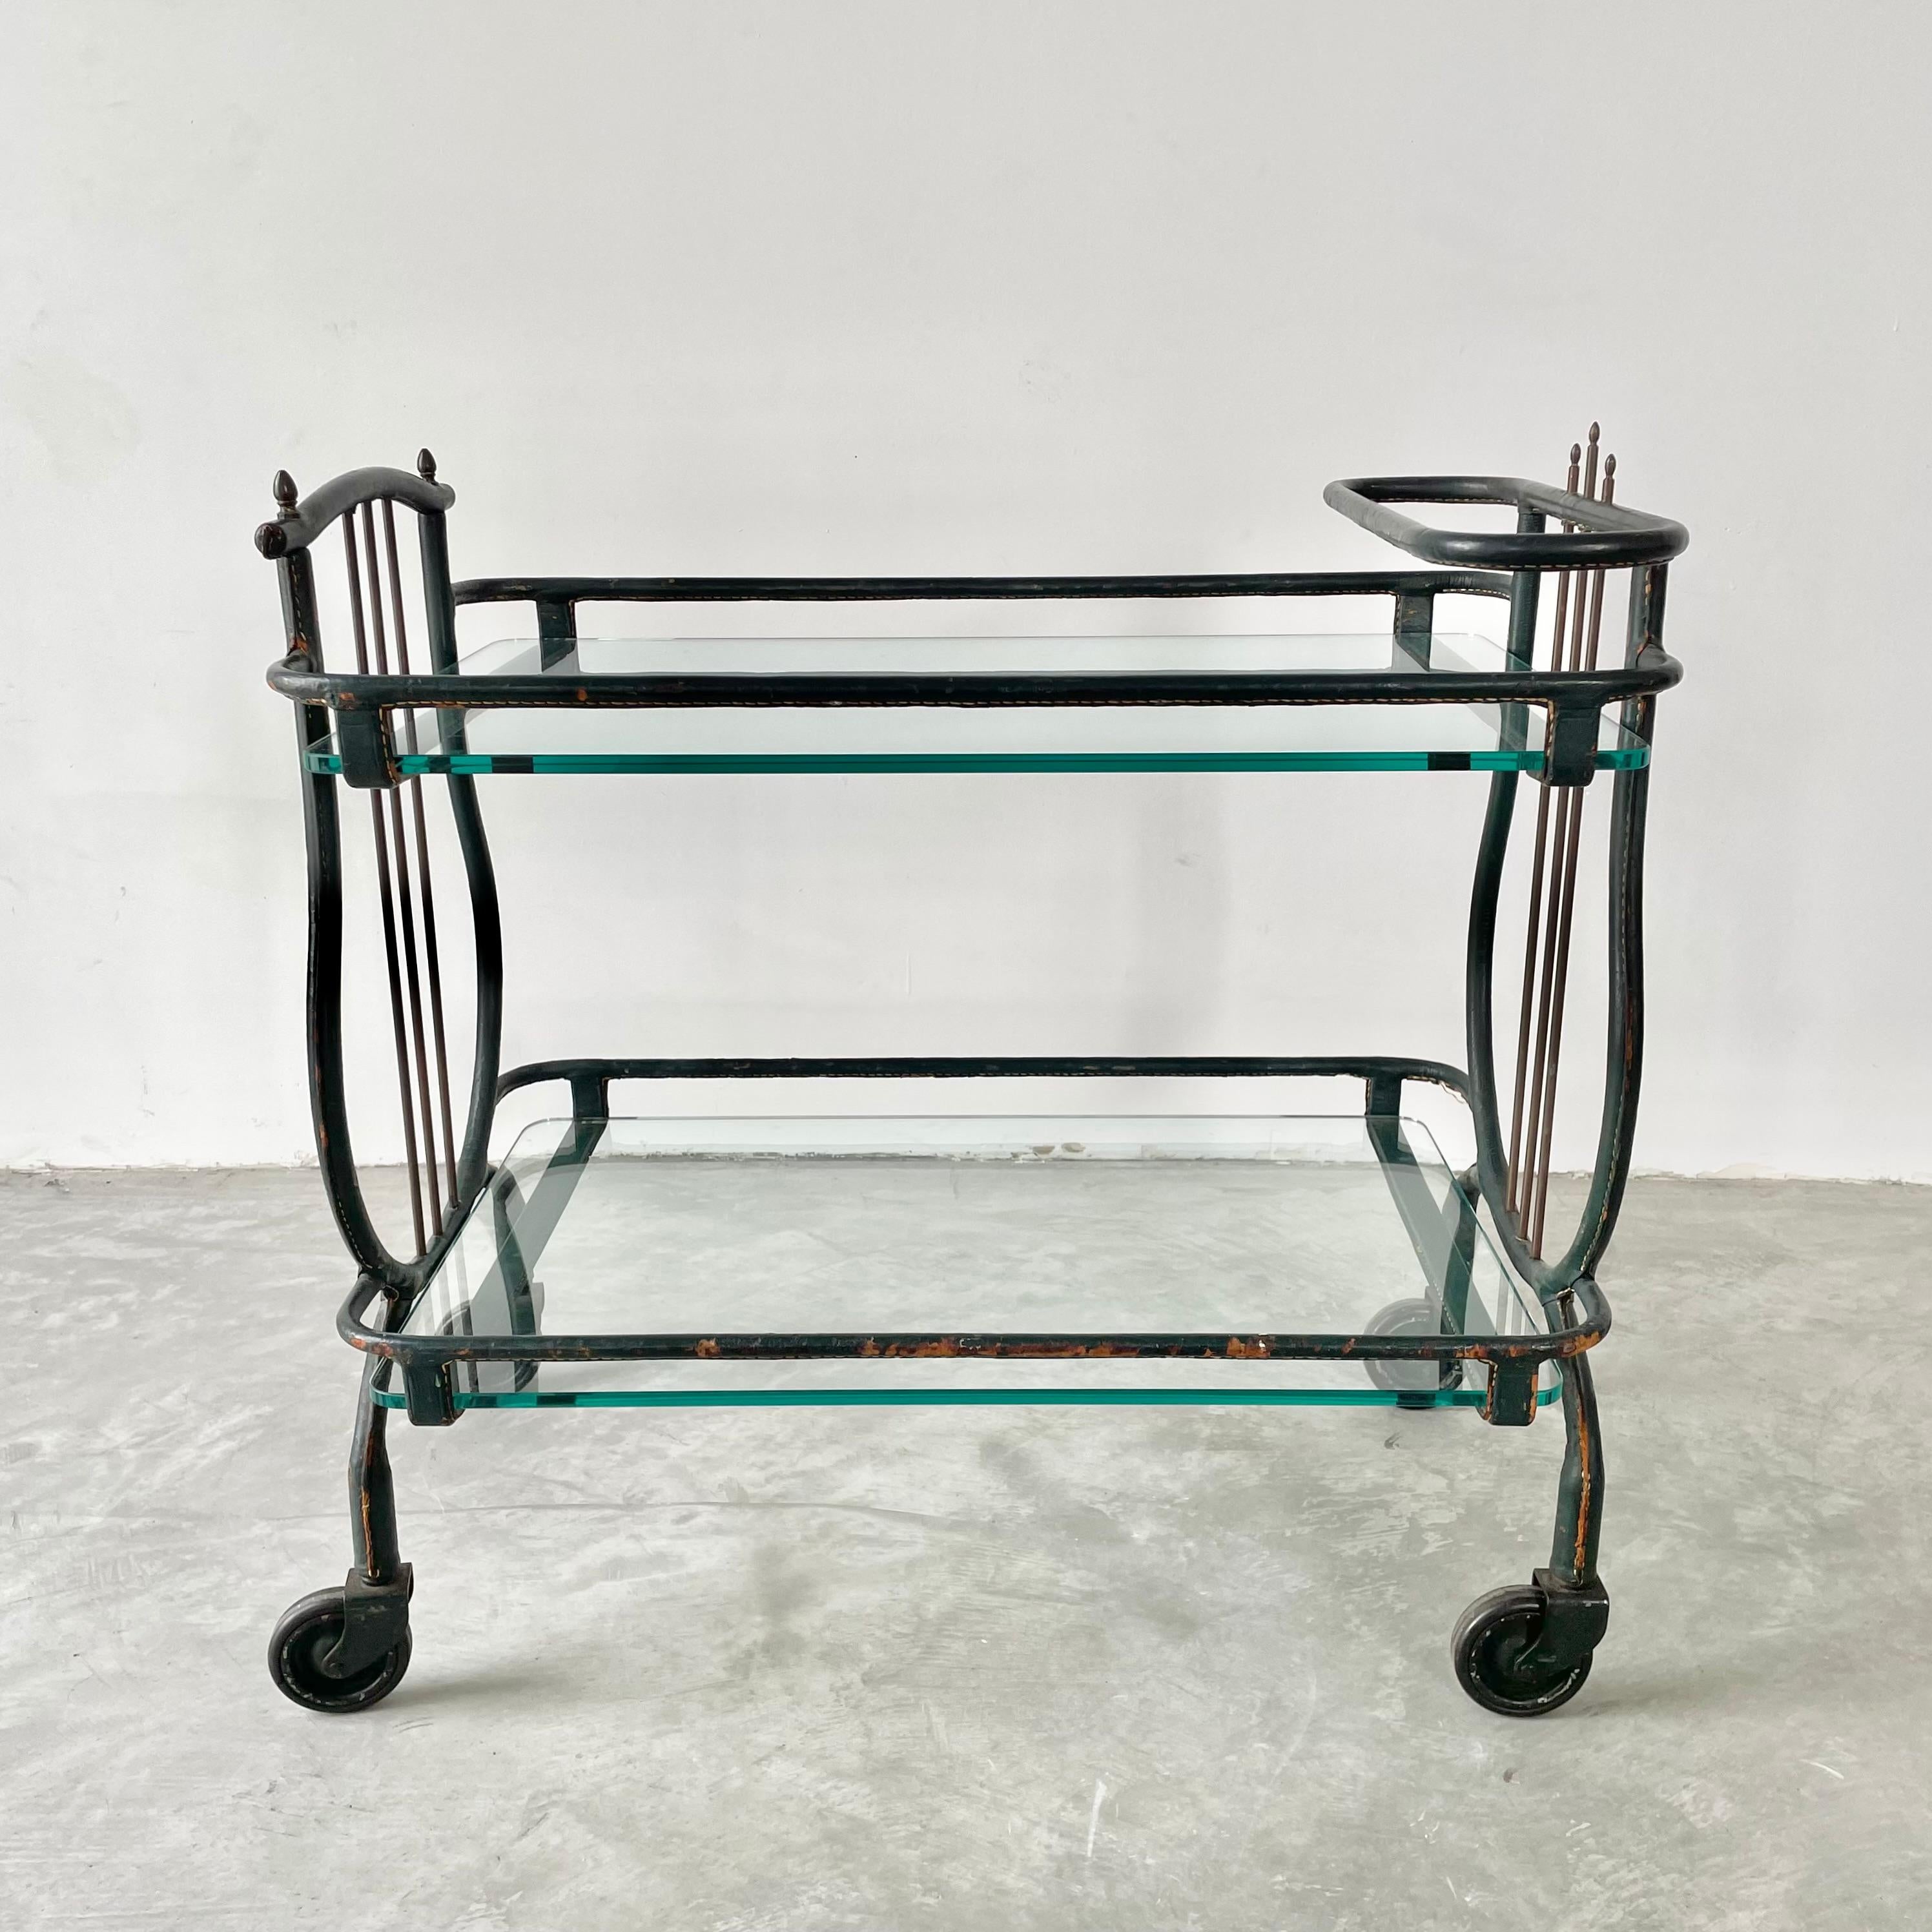 Stunning bar cart by French modernist designer, Jacques Adnet. This piece comes completely wrapped in an emerald green leather. Good original condition. Iron frame with 4 wheels which all roll and swivel 360 degrees. Serving cart features two newly